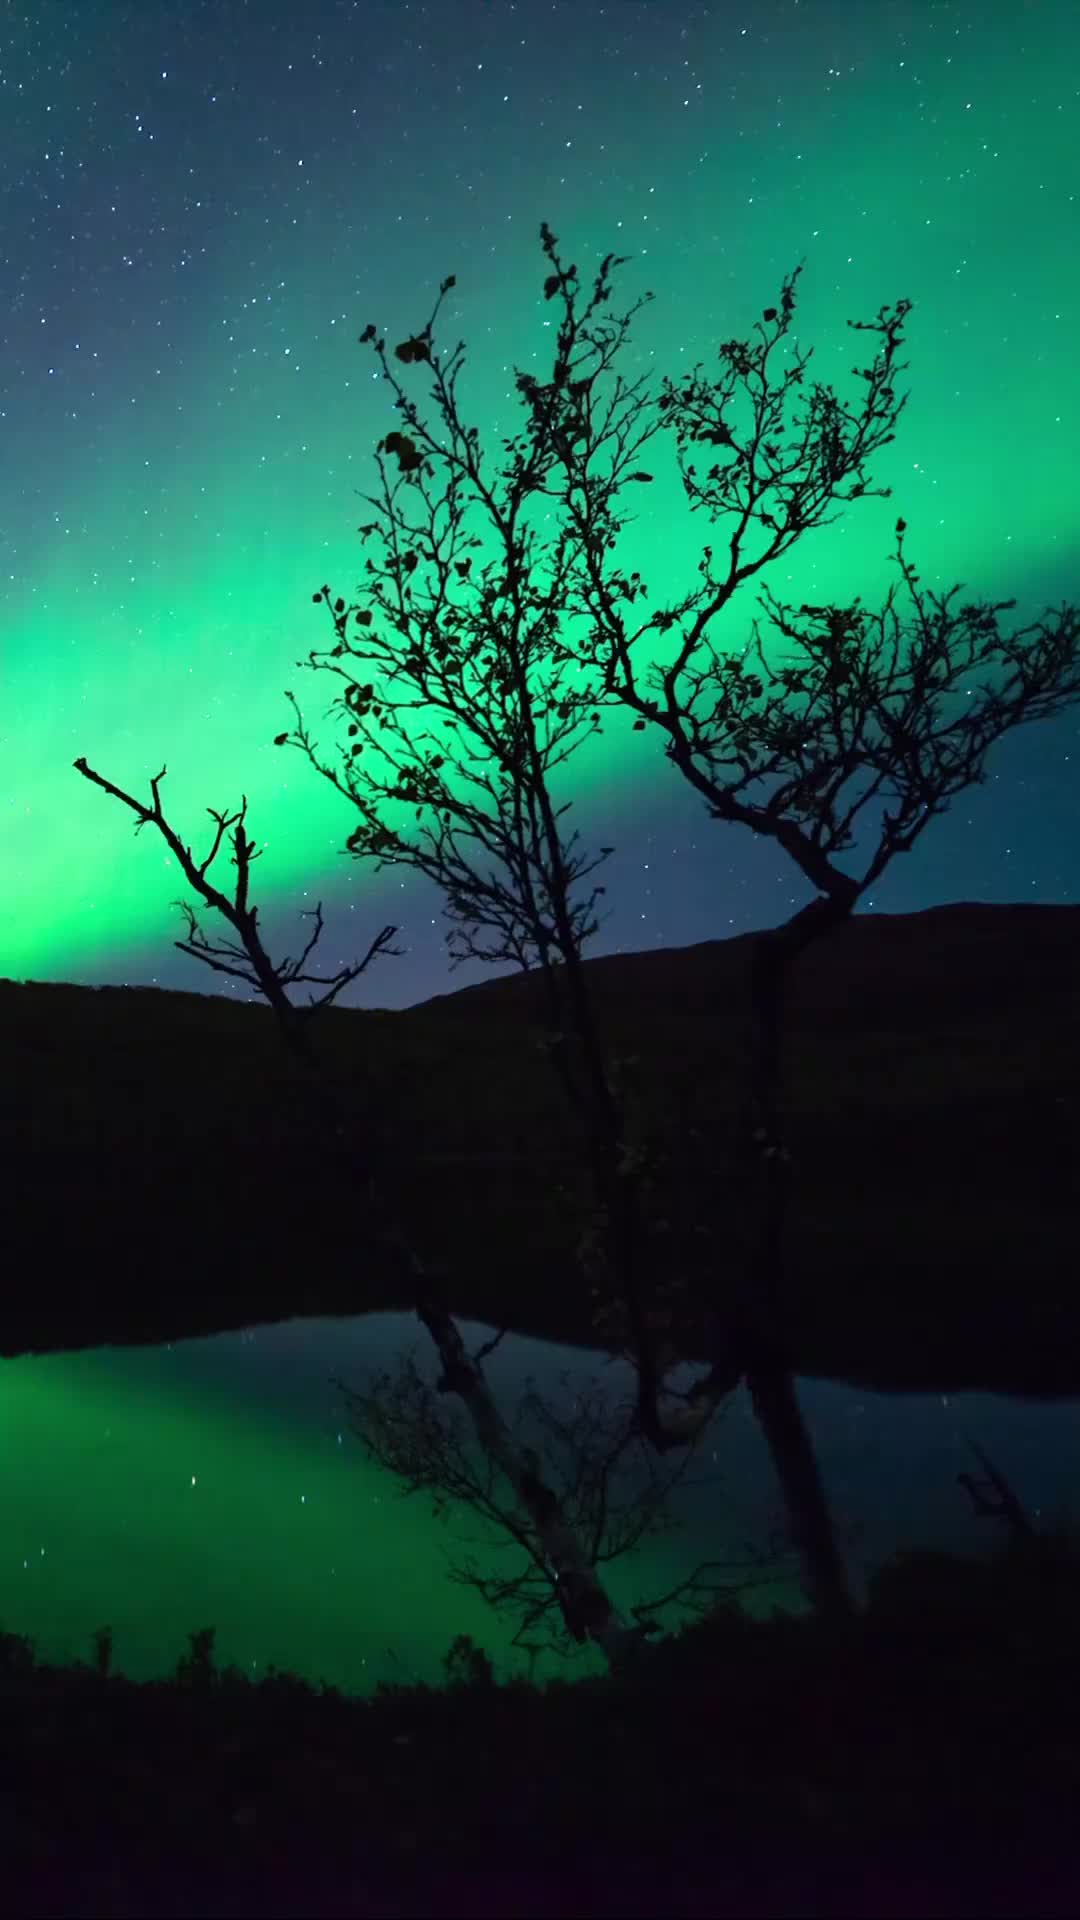 Autumn Nights in Norway: Aurora and Starry Skies